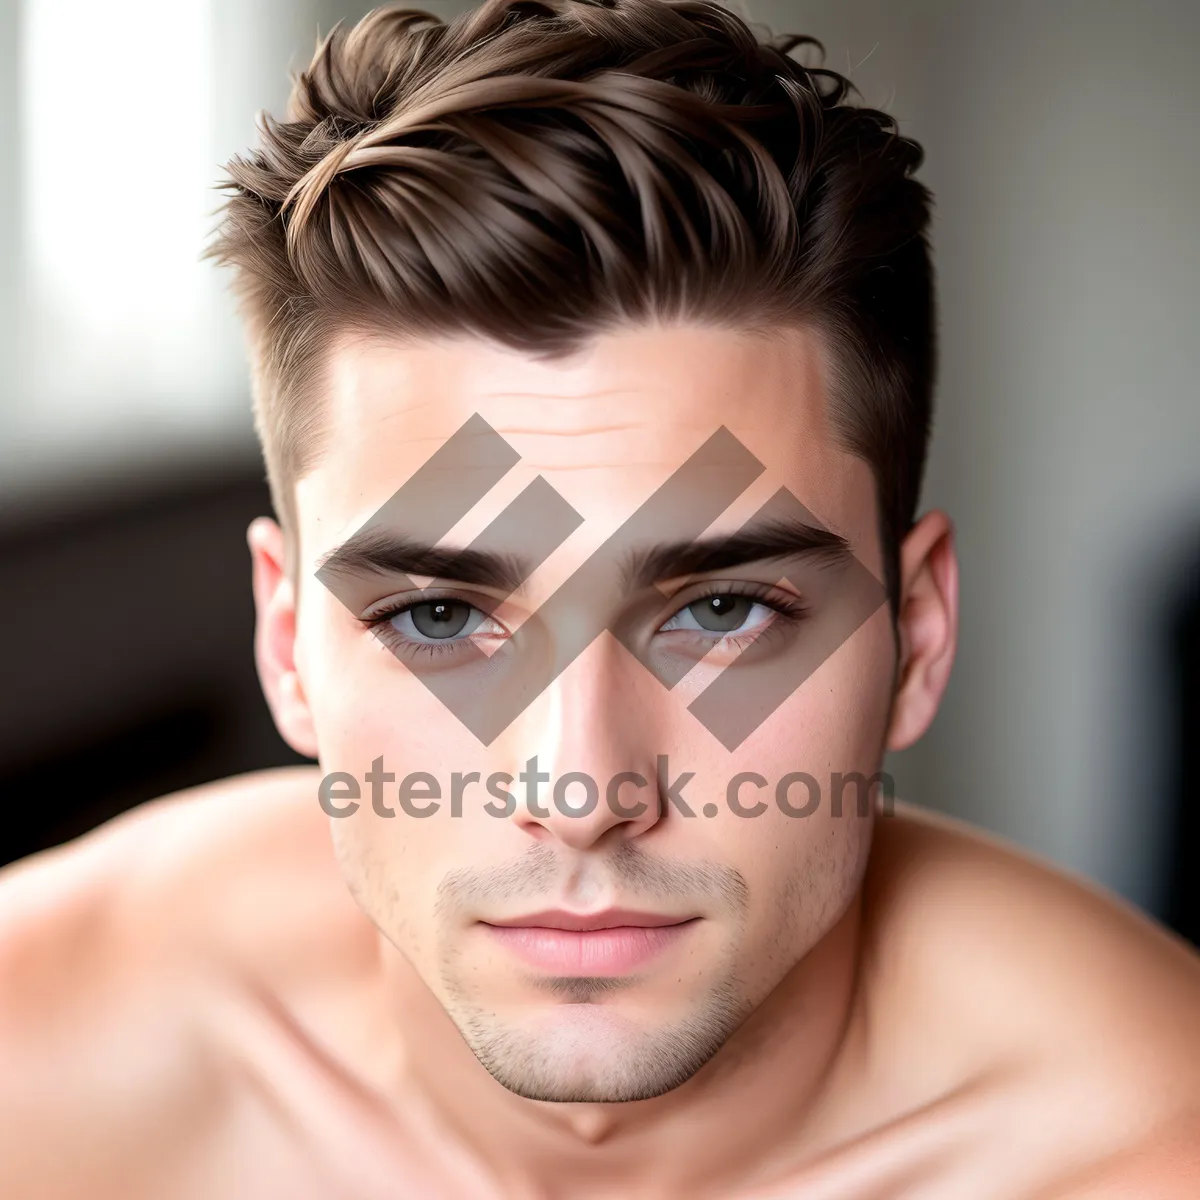 Picture of Shoulder-length Hair, Attractive Model with Expressive Eyes